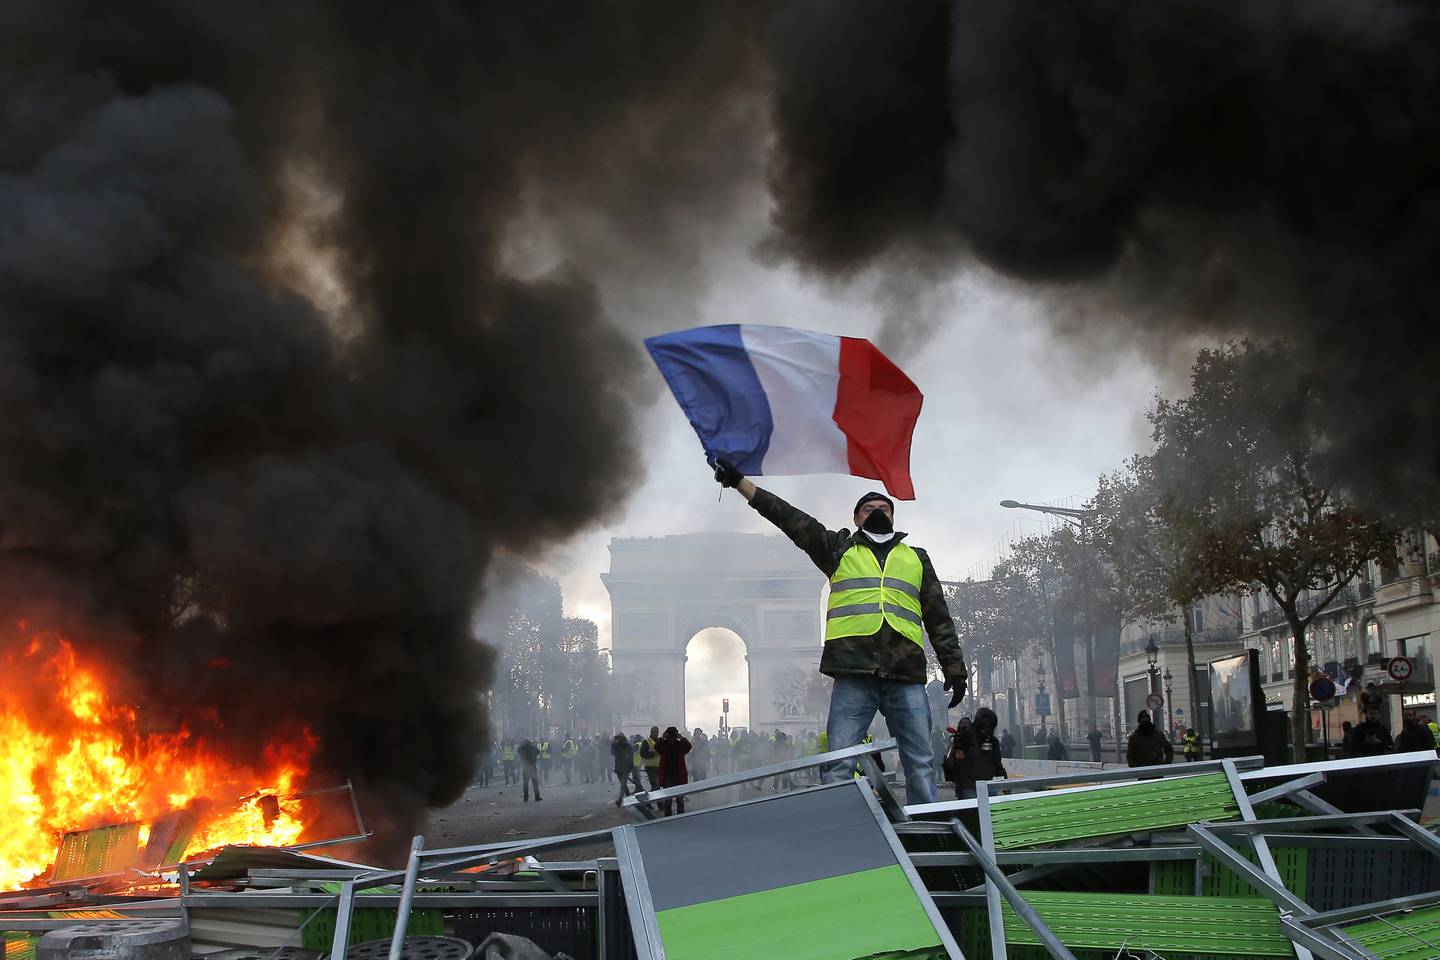 A demonstrator waves the French flag on a burning barricade on the Champs-Elysees in Paris, during a Yellow Vest demonstration in 2018. AP Photo